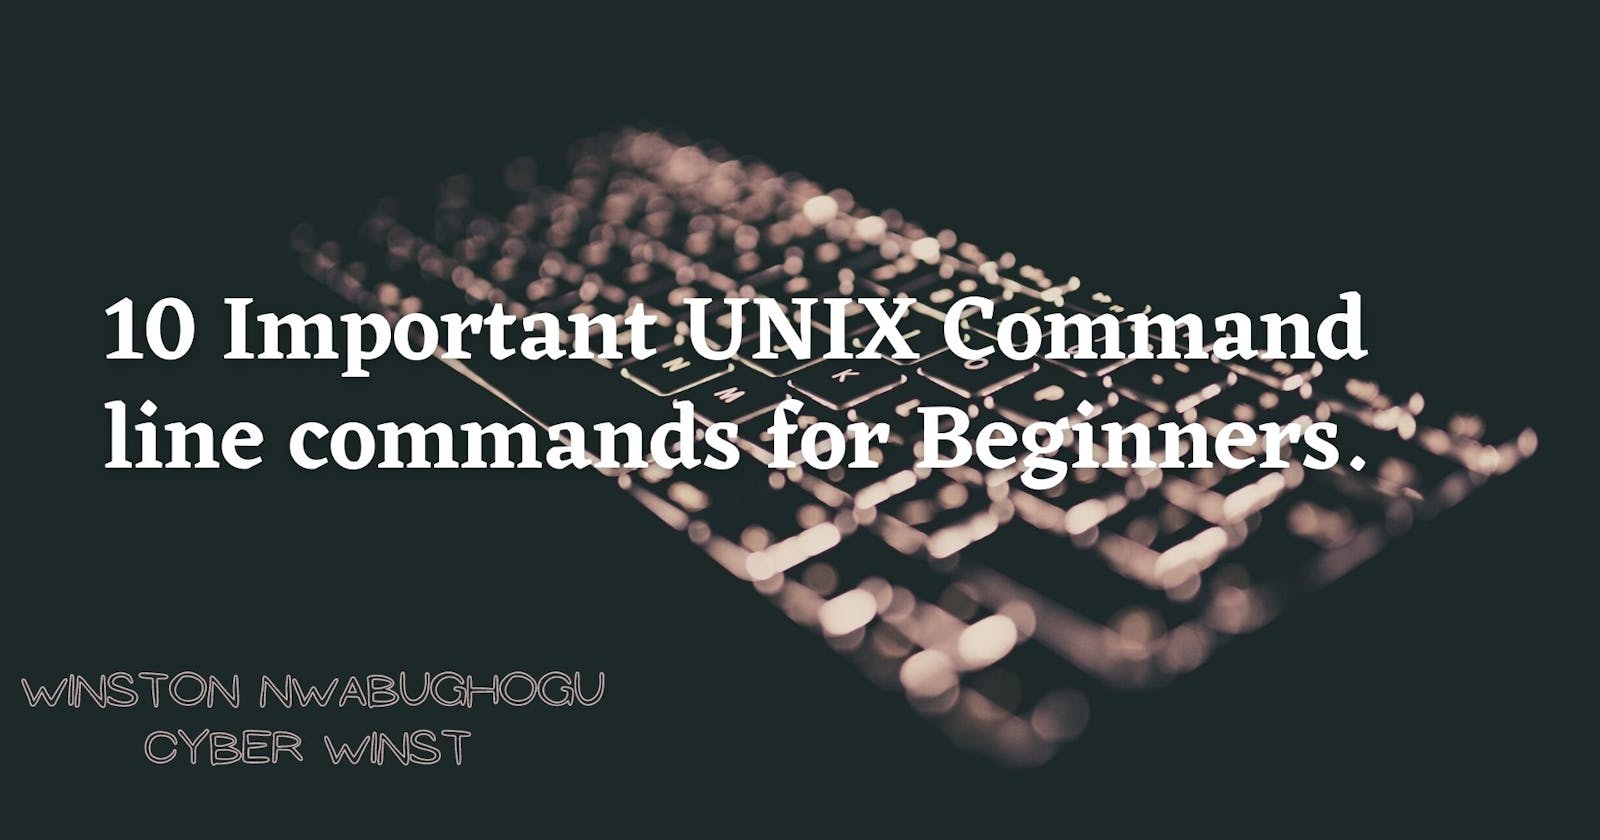 10 Important UNIX Commands for Beginners..